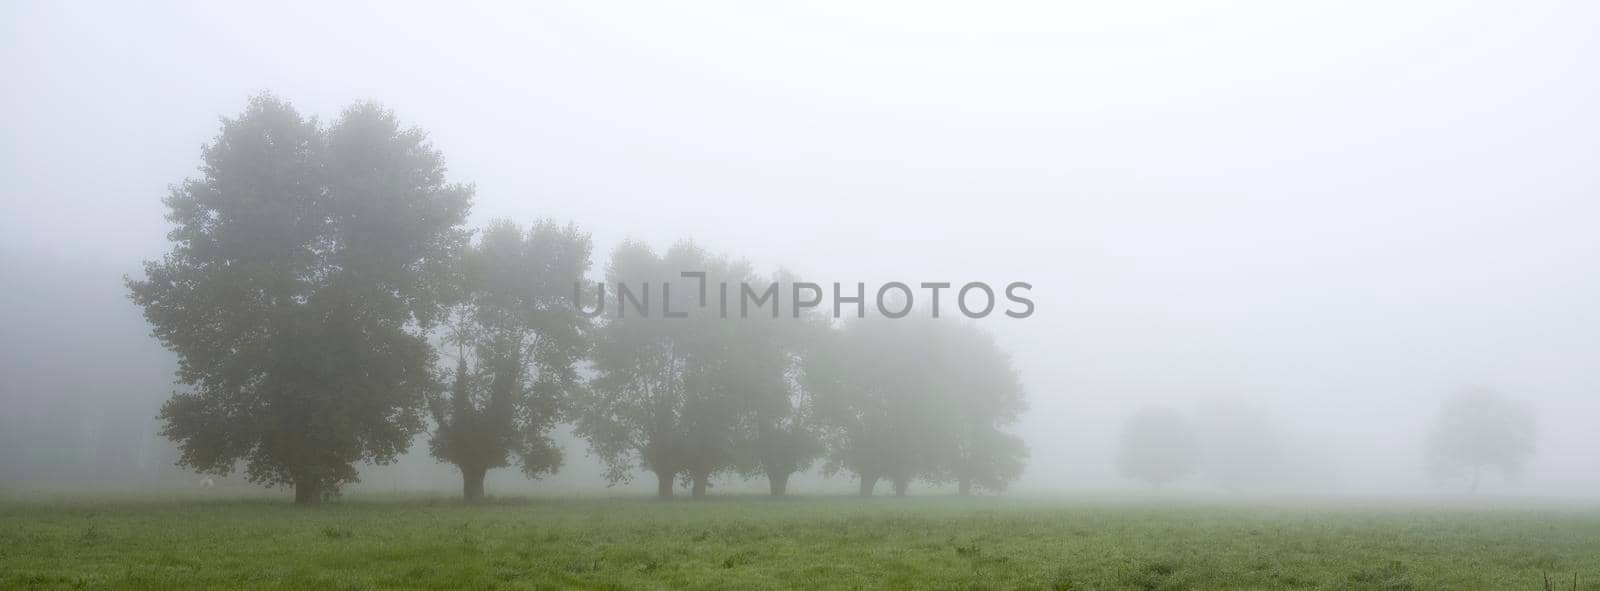 trees in morning mist of french normandy on panorama photograph by ahavelaar